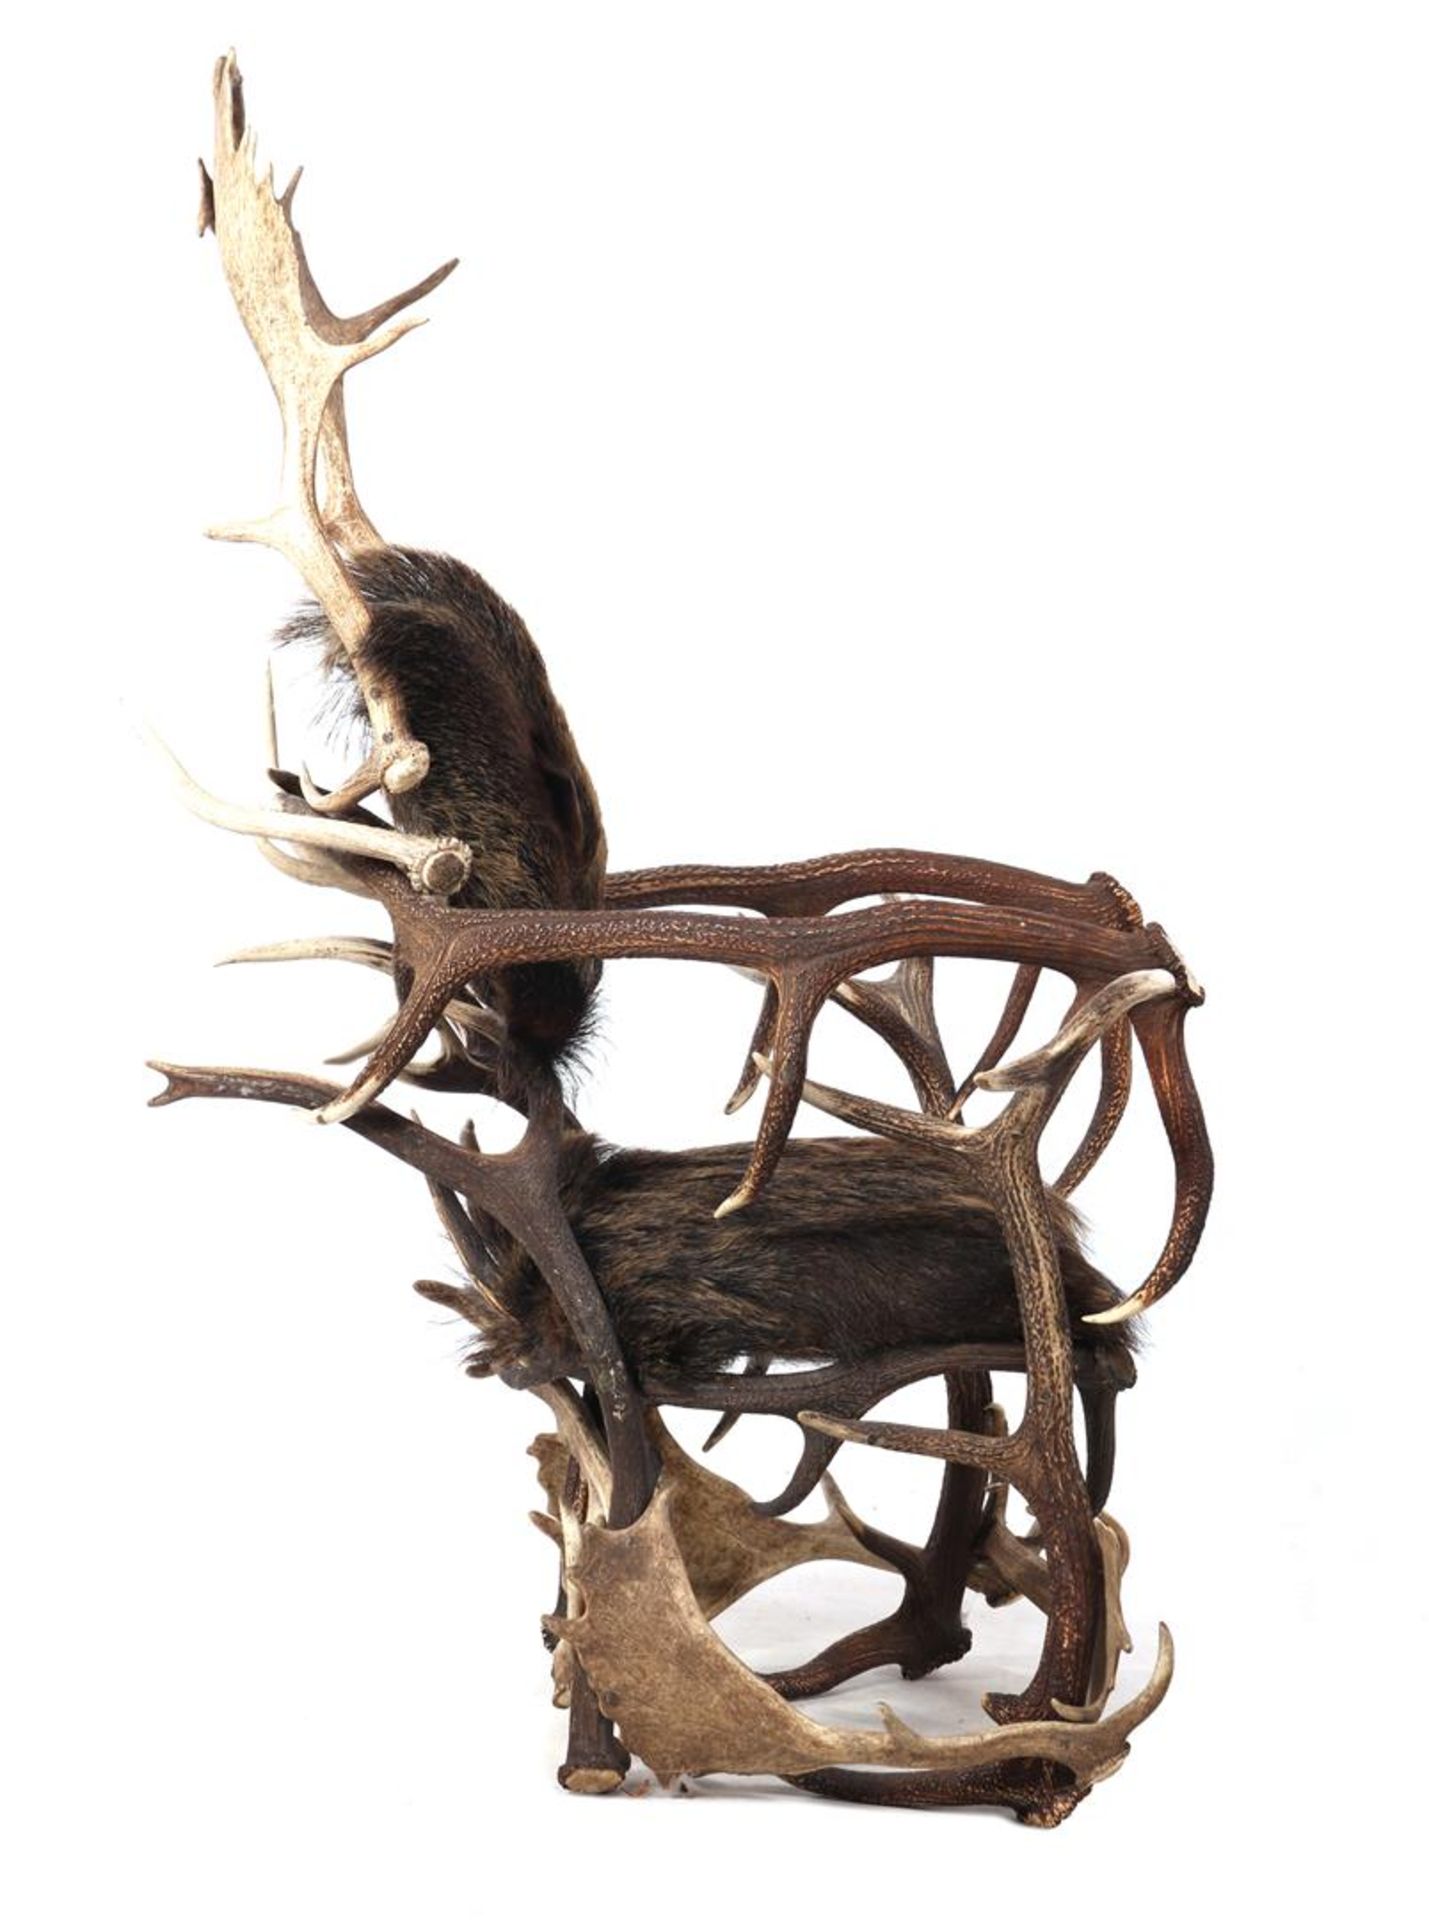 Armchair made of antlers and fur - Bild 2 aus 3